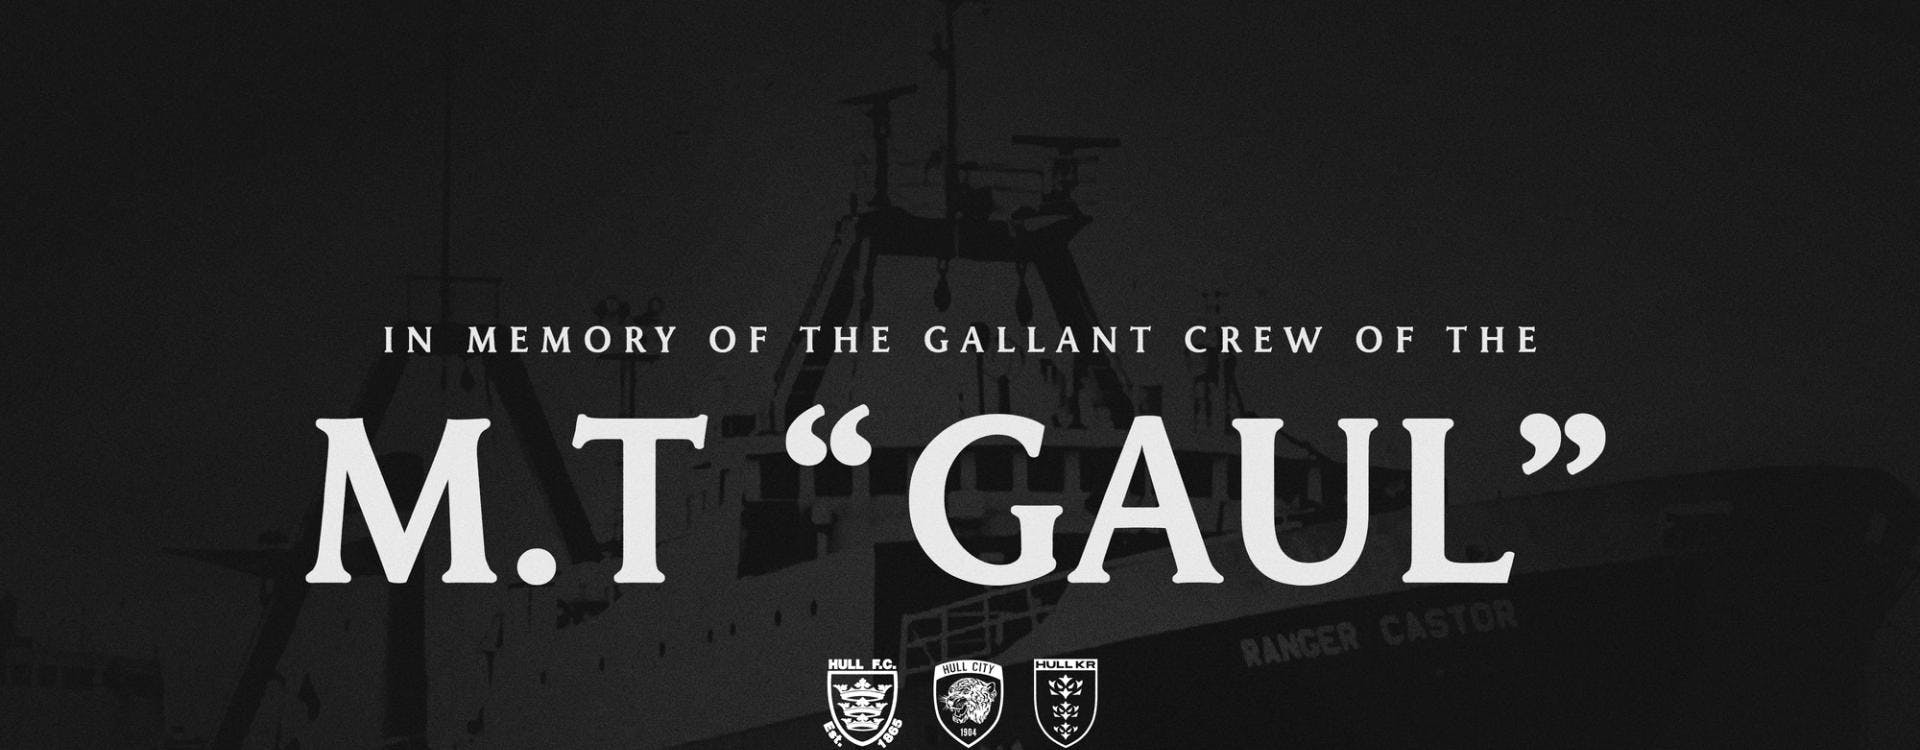 Robins unite with Hull FC and Hull City to commemorate the 50th anniversary of the Gaul trawler tragedy